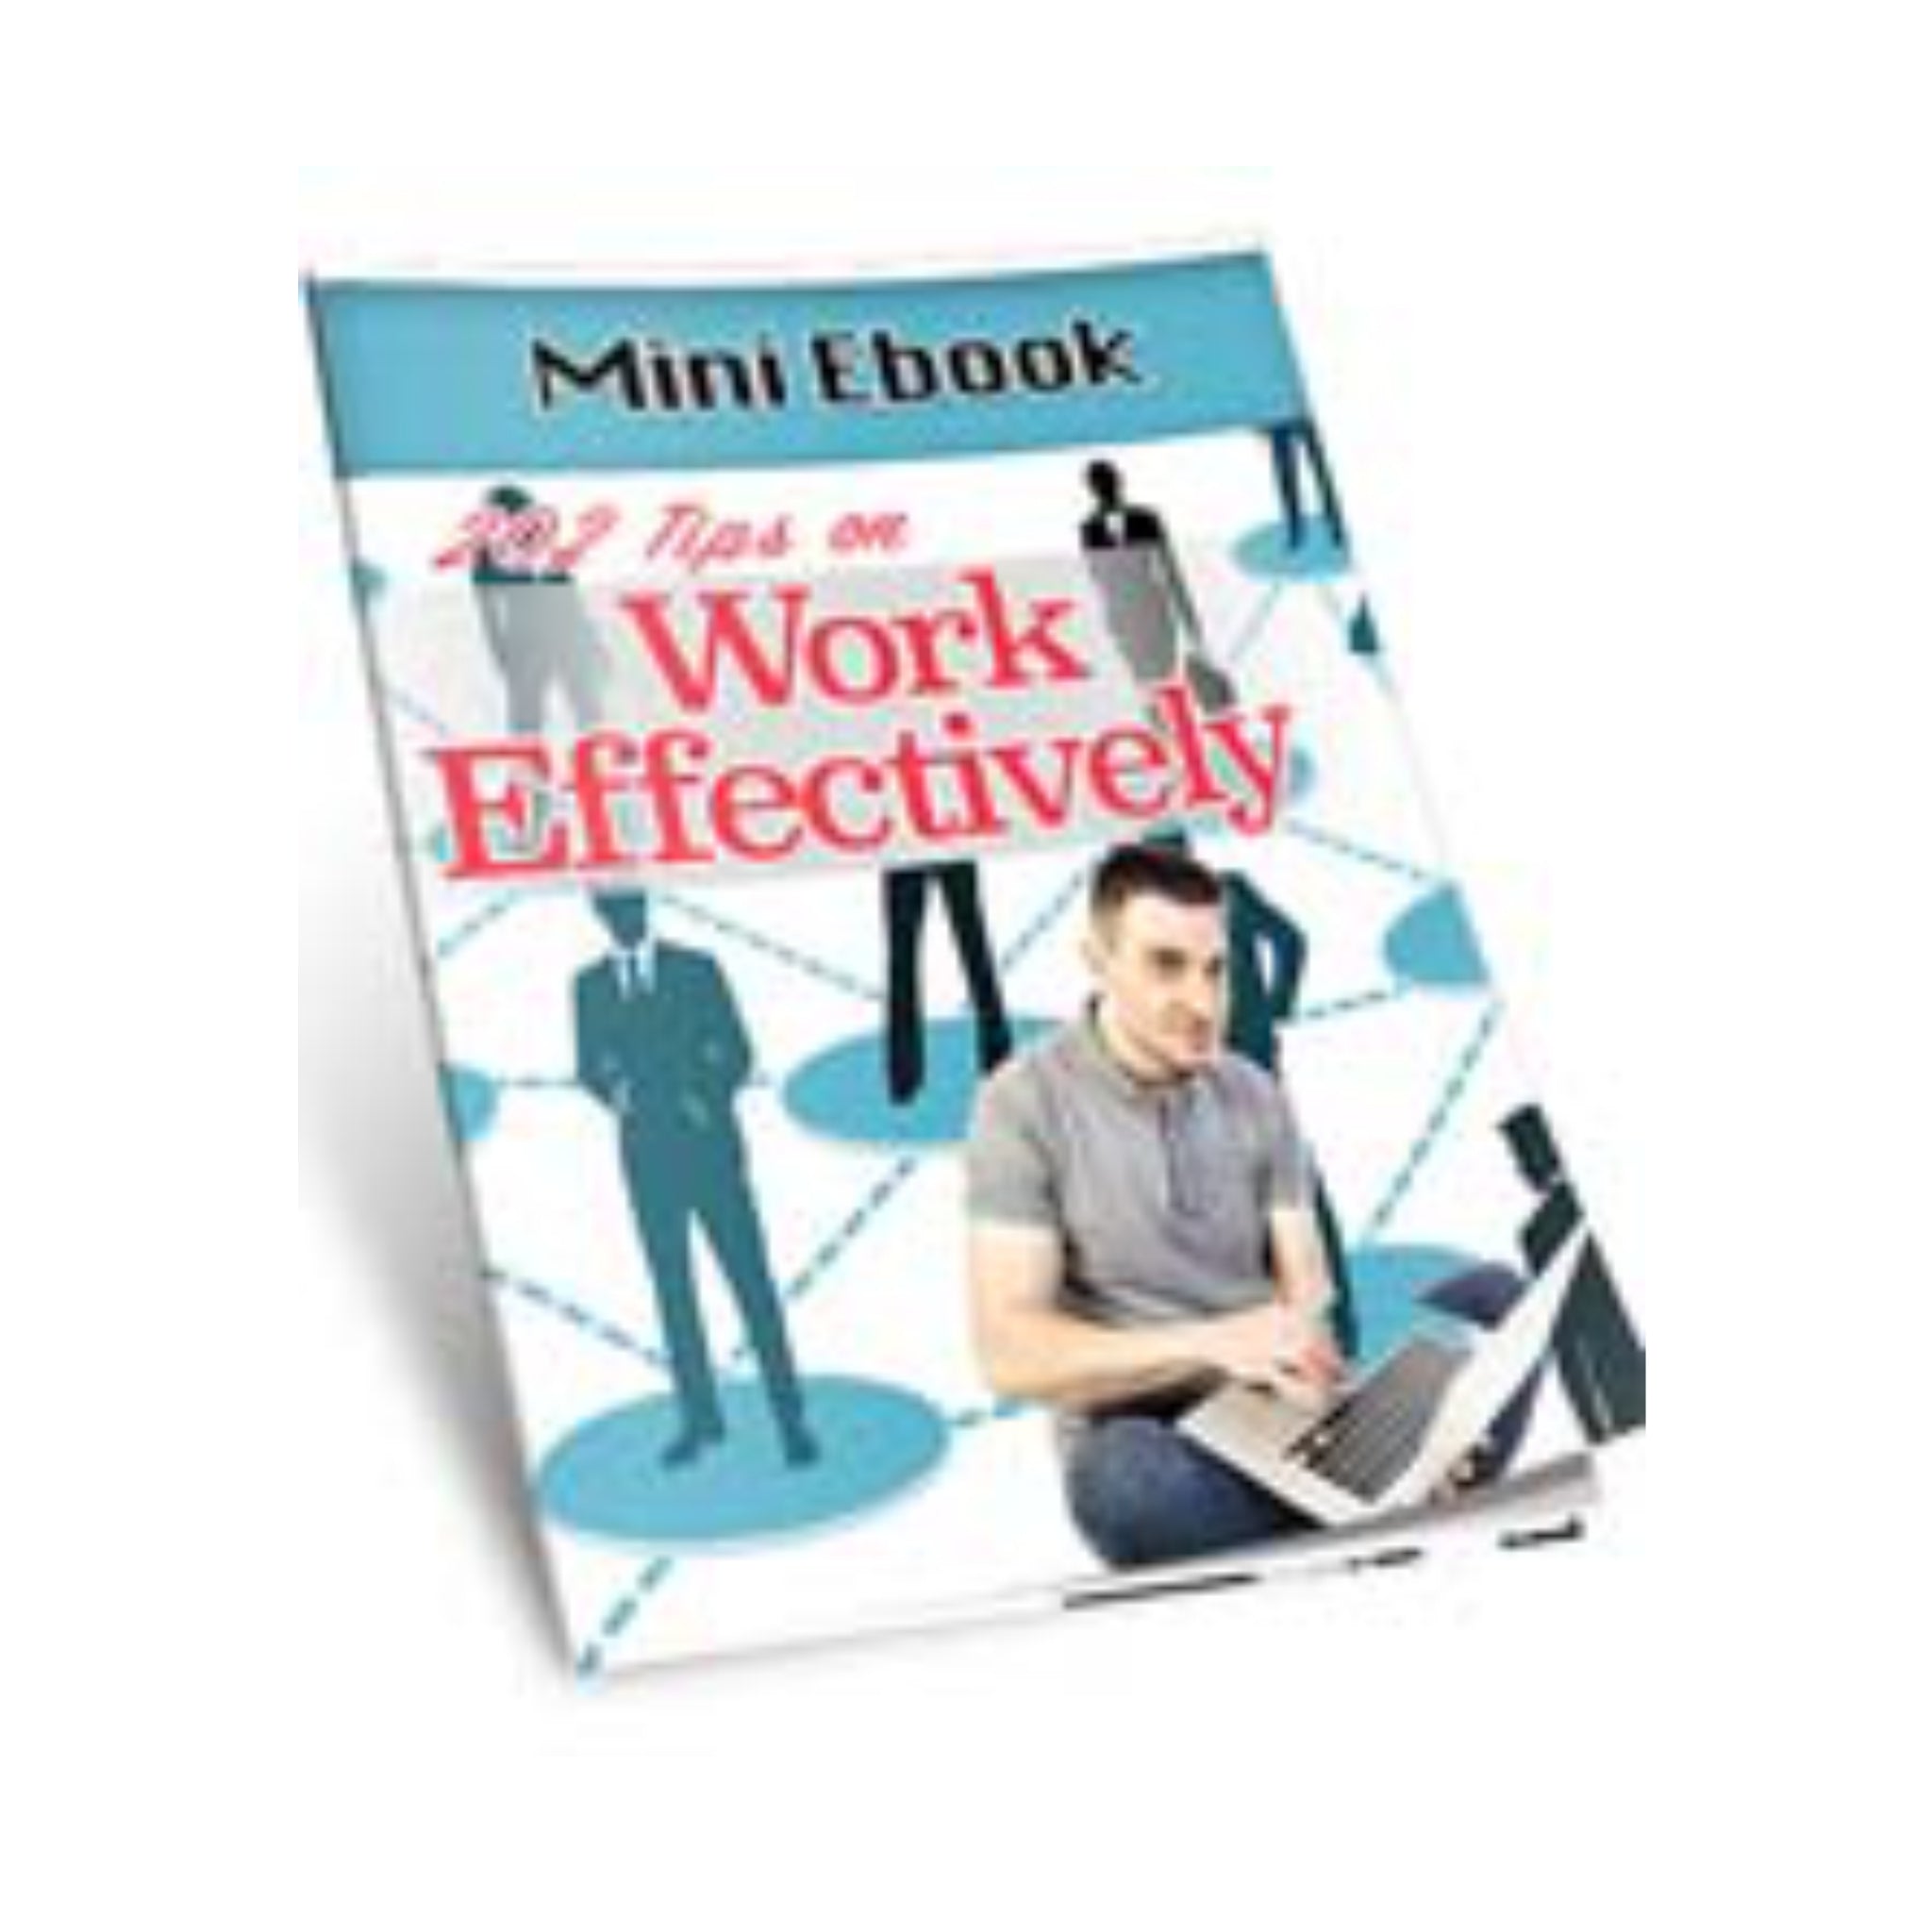 202 Tips To Work Effectively Ebook